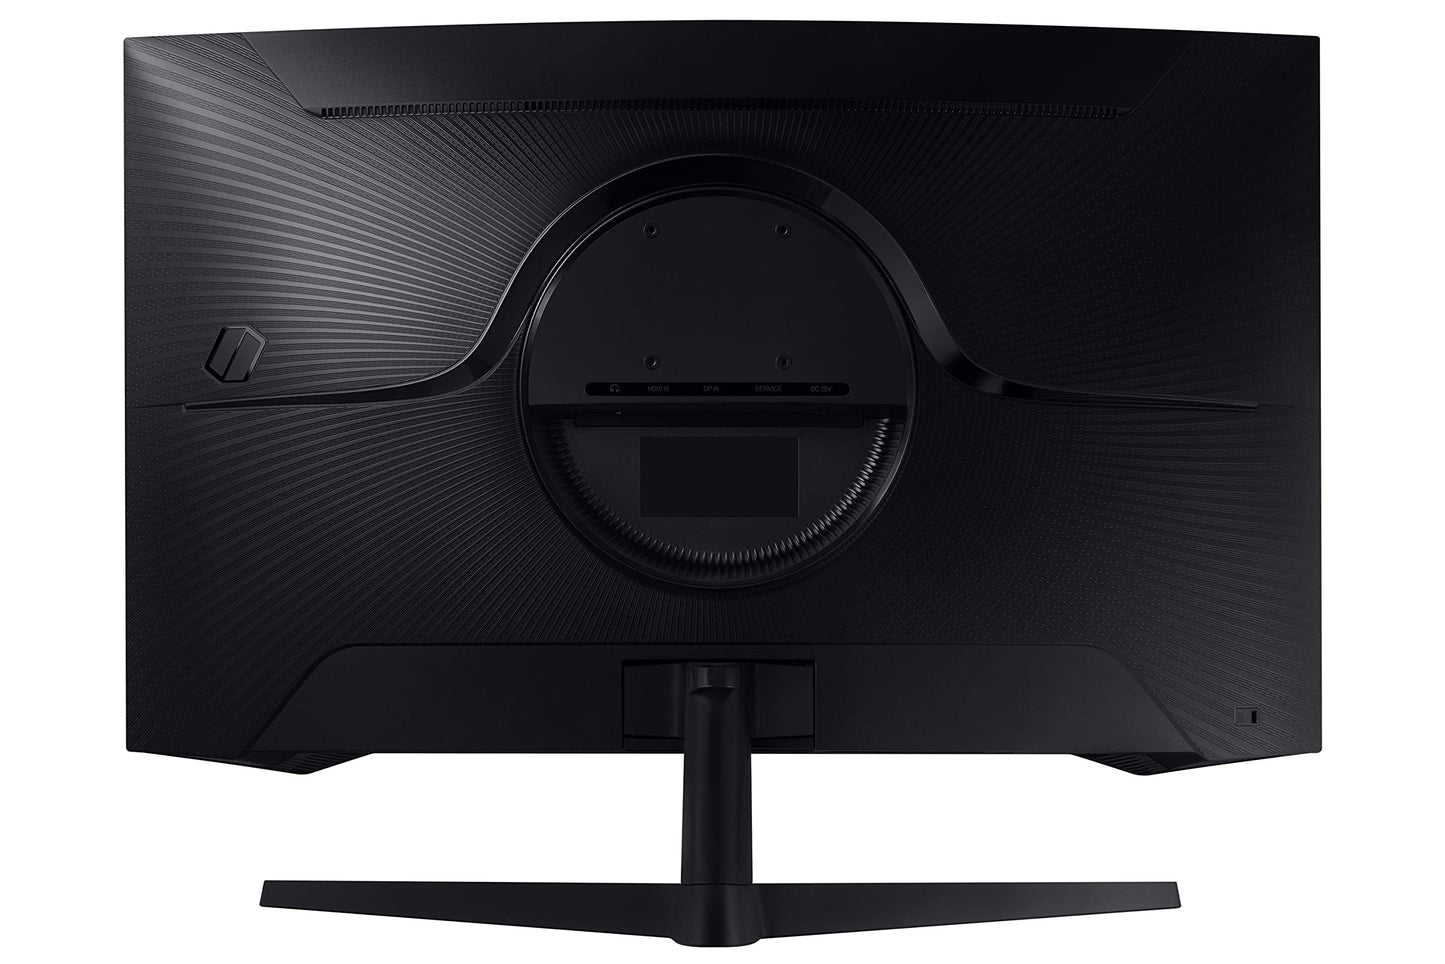 Samsung 27" Odyssey G5 LC27G55, 1000R Curved Gaming Monitor with 144Hz Refresh Rate & 1ms Response Time, WQHD Resolution, AMD FreeSync Premium - LC27G55TQBMXUE Black